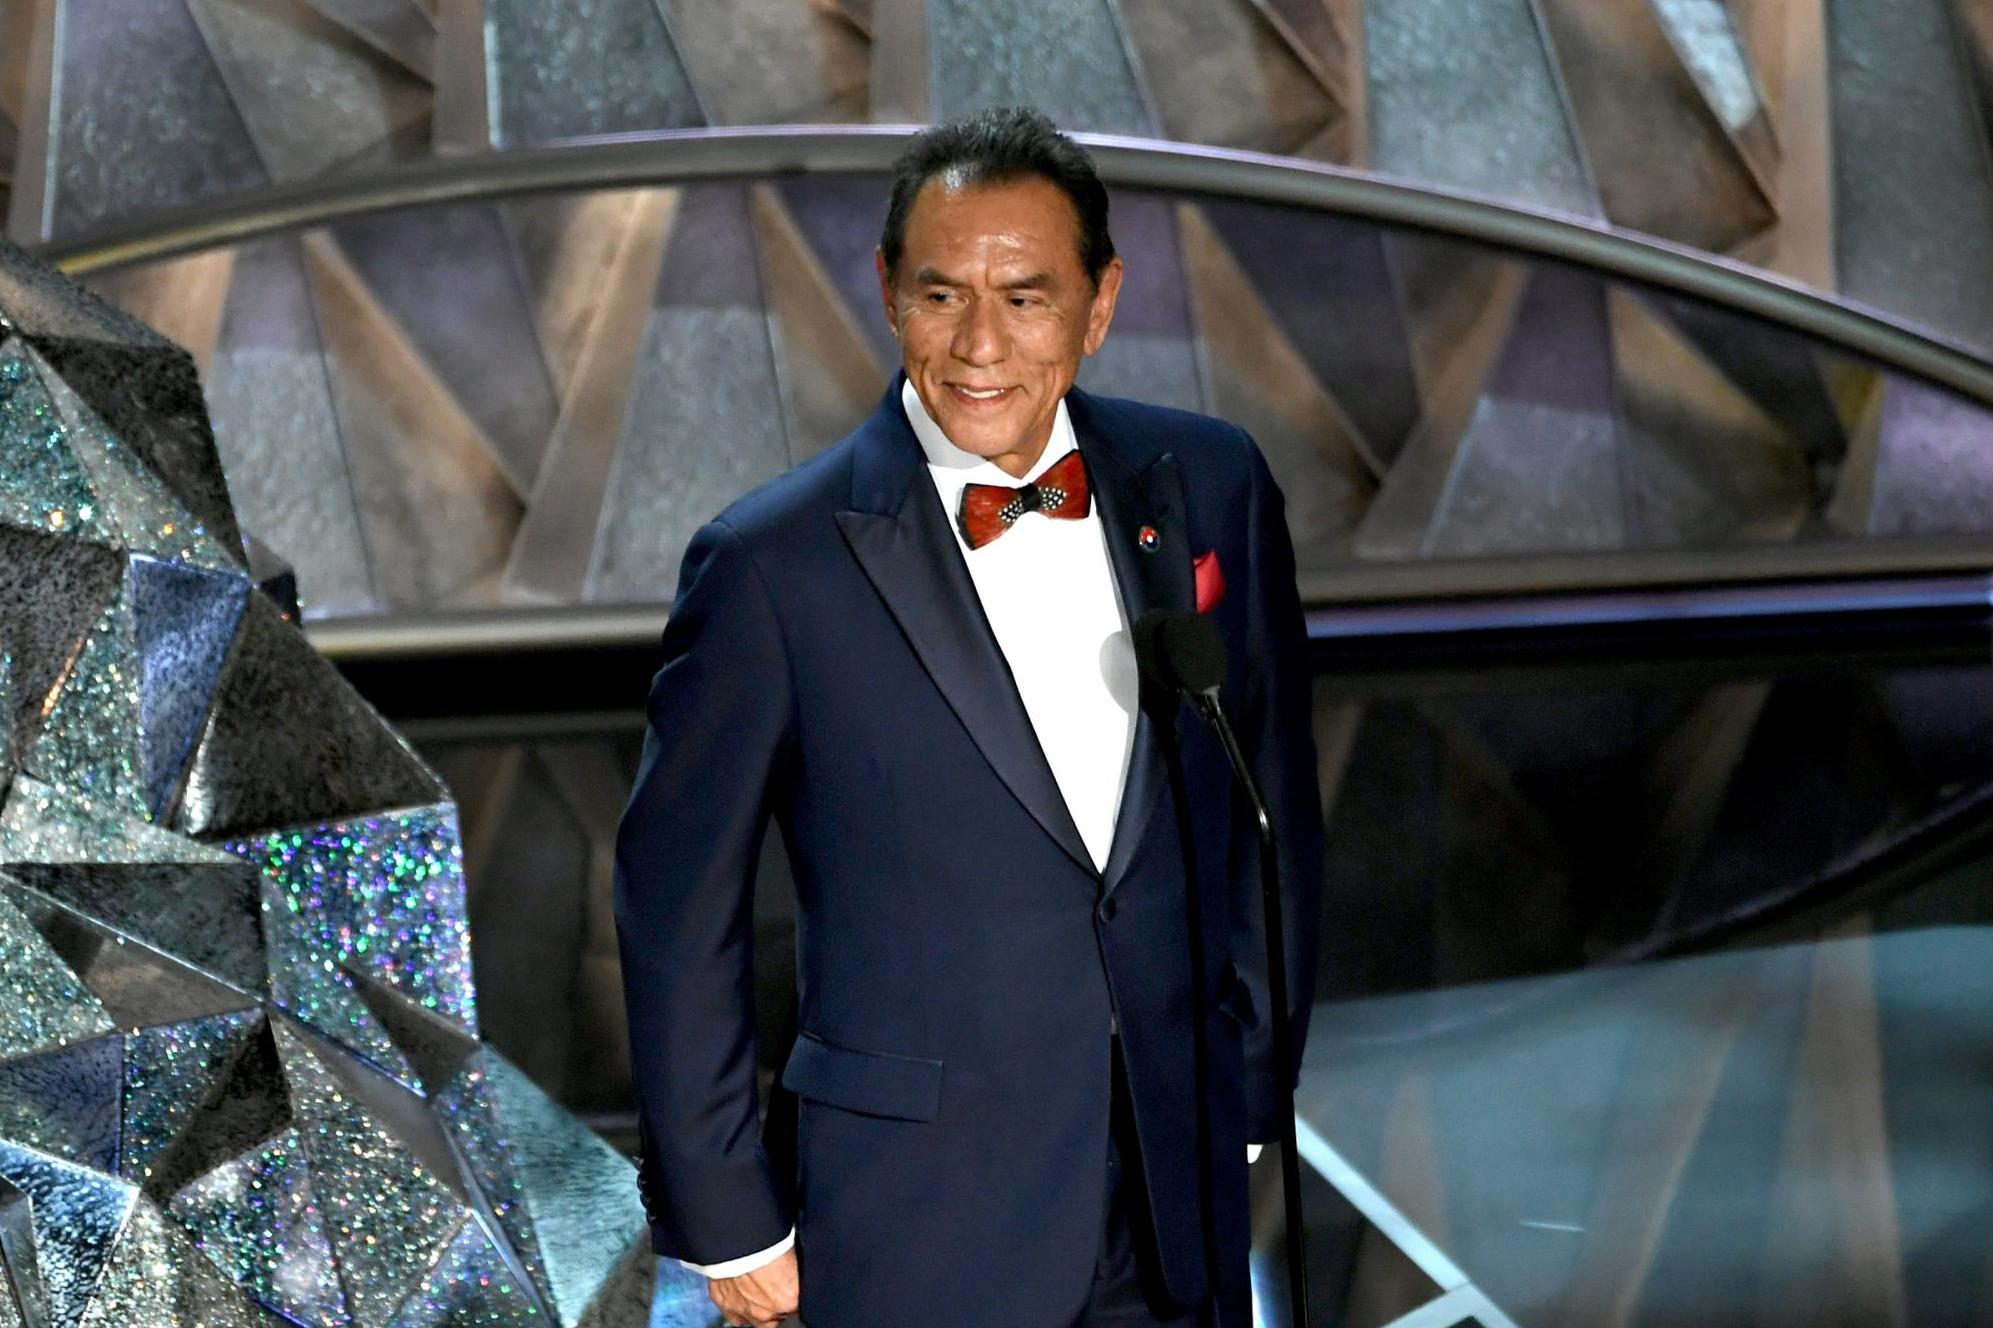 Actor Wes Studi during the 90th Annual Academy Awards